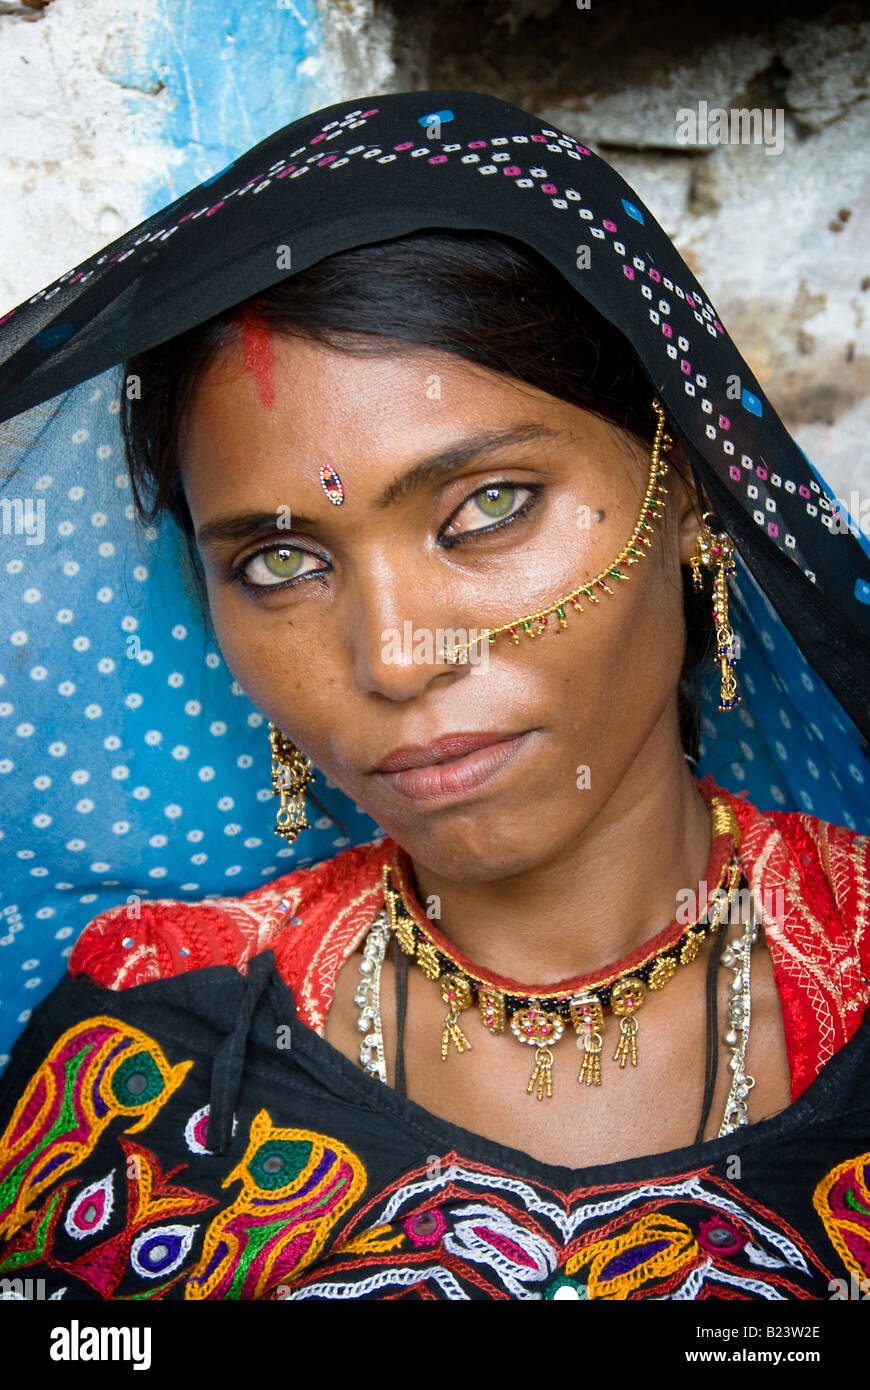 Portrait of a beautiful, traditionally dressed Indian woman from the Thar desert in Rajasthan (India) Stock Photo